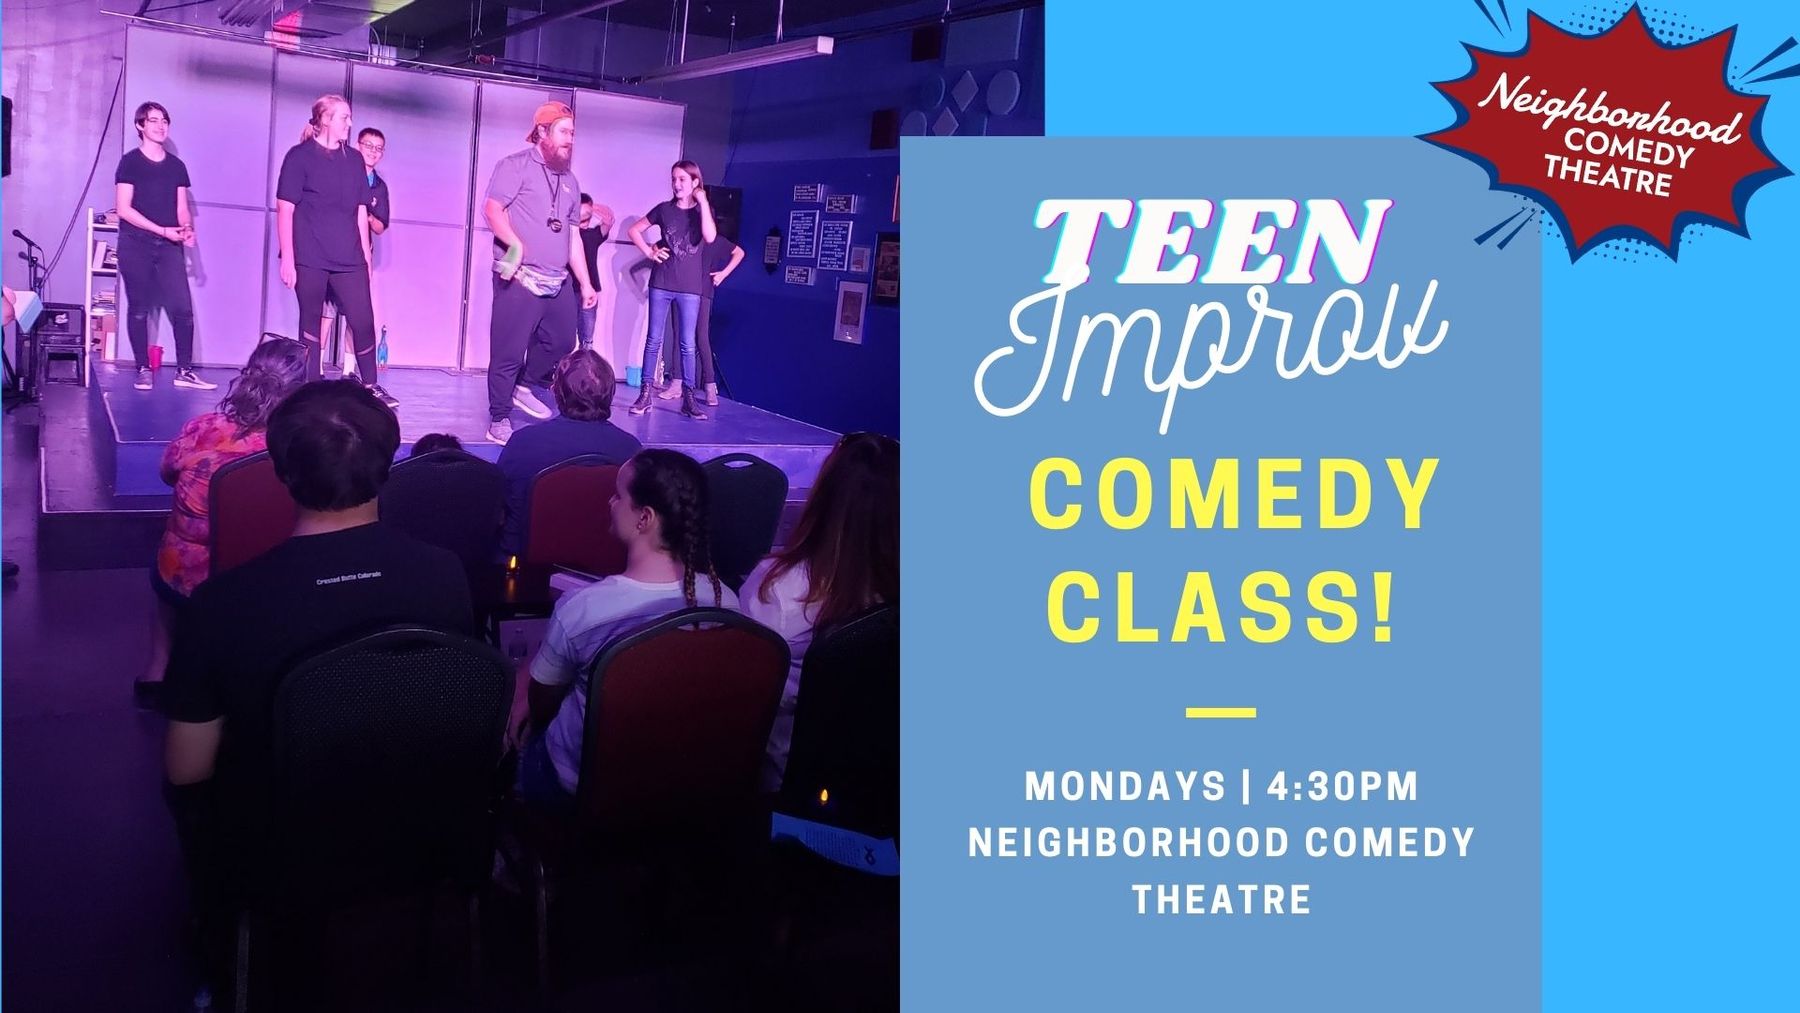 neighborhood comedy theatre, neighborhood comedy theater, NCT, comedy class, teen improv, things to do in downtown mesa, things to do, visit mesa